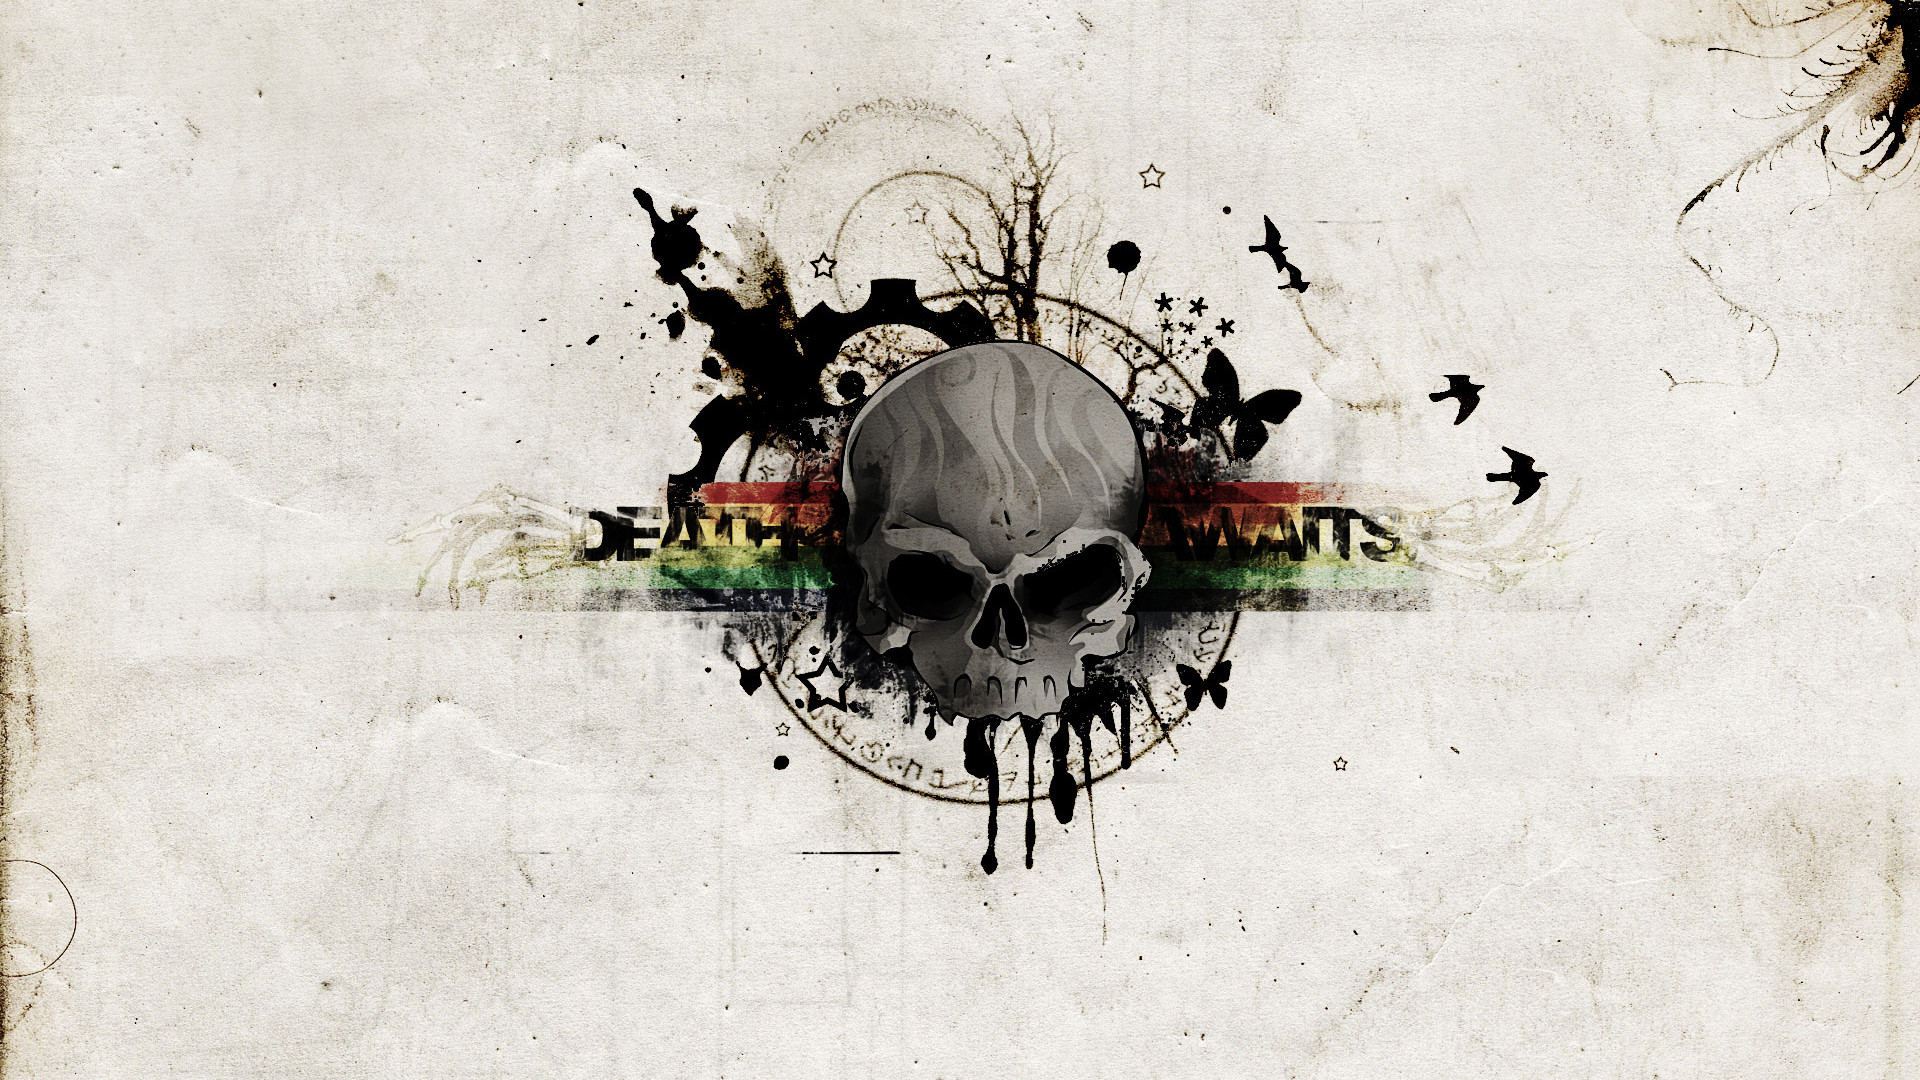 Abstract Skull Wallpaper (best Abstract Skull Wallpaper and image) on WallpaperChat